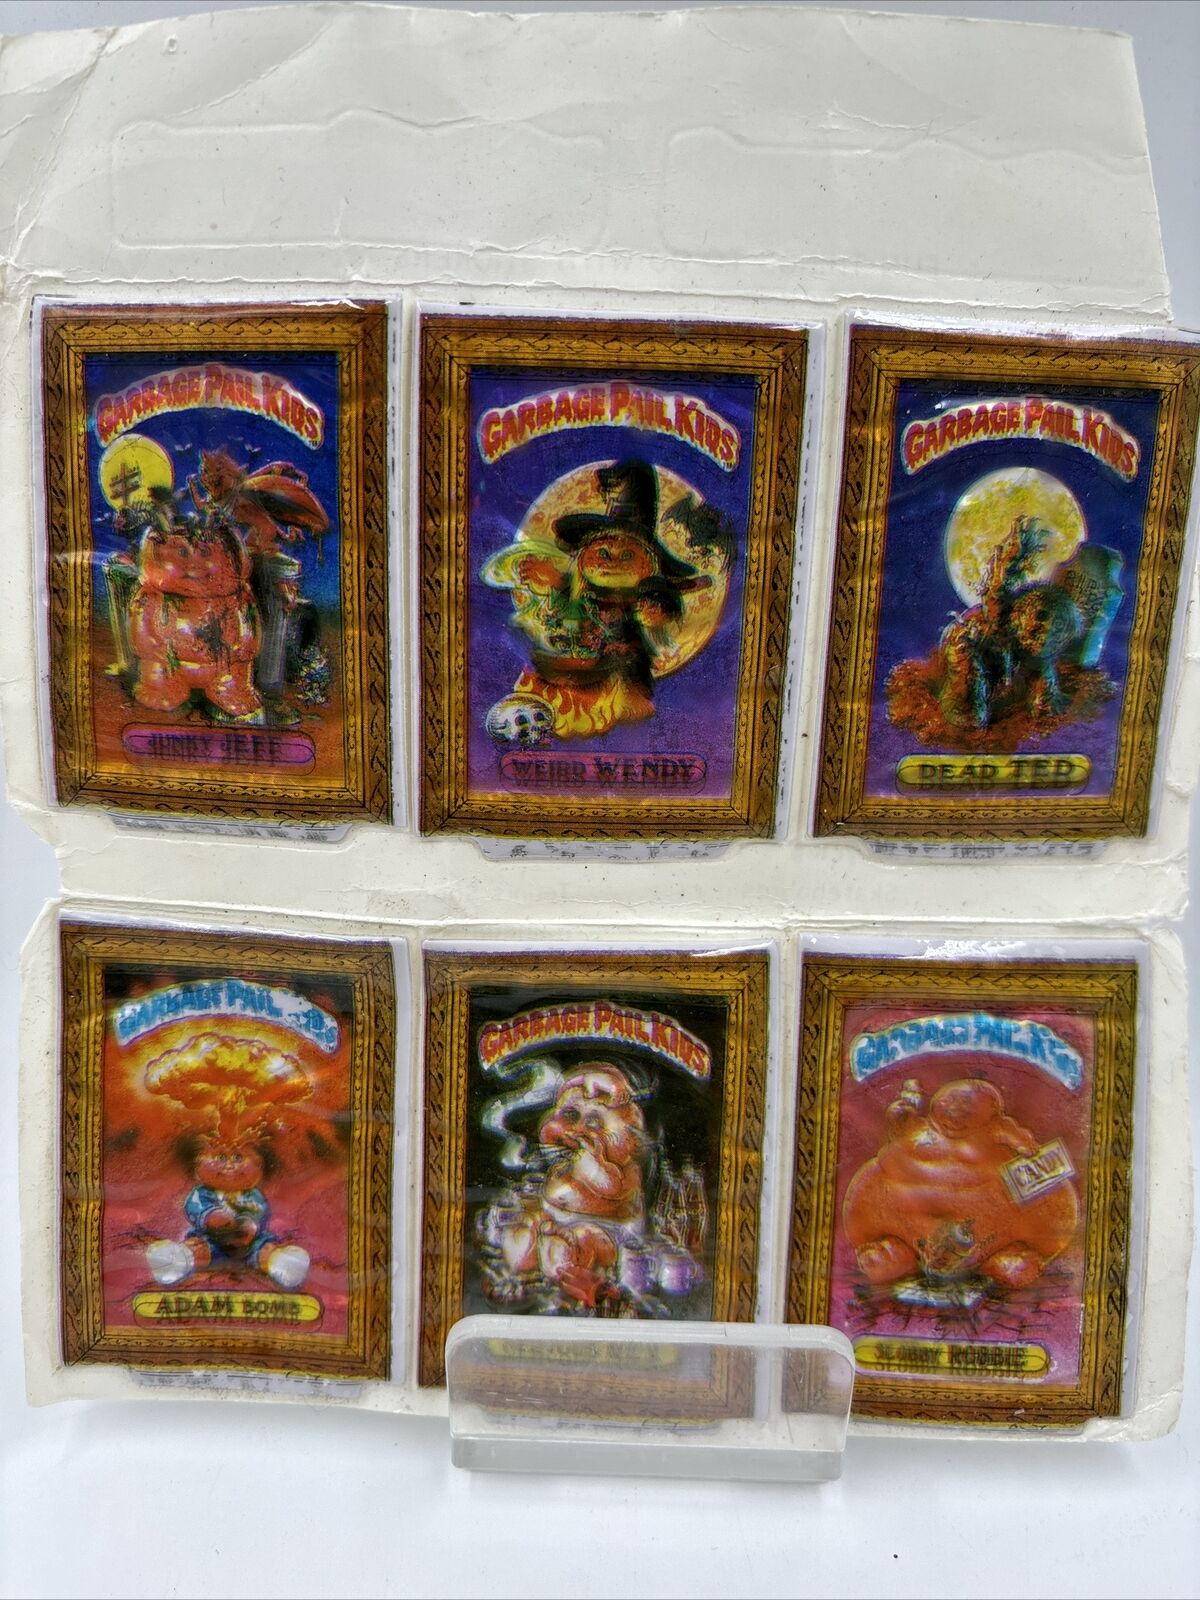 🔥🔥RARE DOUBLE PRINTED 1986 TOPPS Garbage Pale Kids Stick-Ons Lot Of 6 Stickers